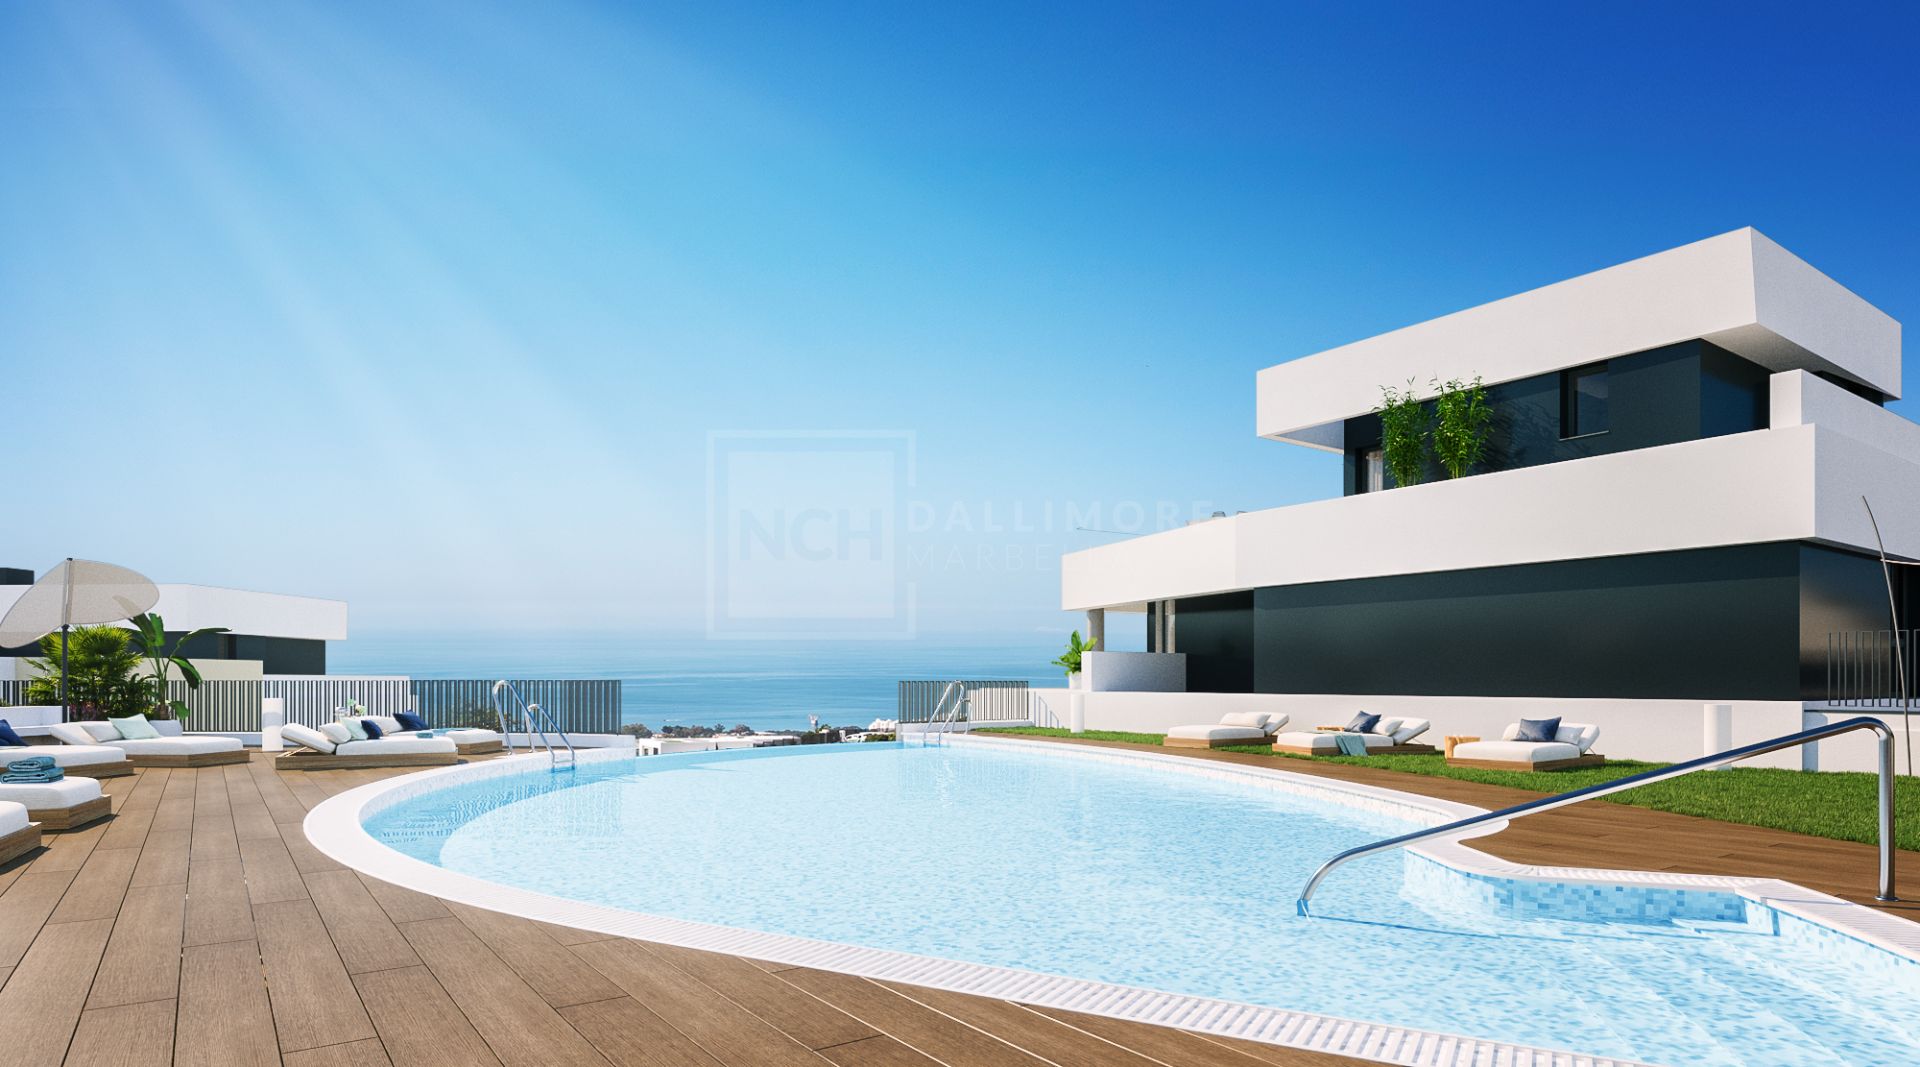 BRAND NEW LUXURY CONTEMPORARY 2-BEDROOM APARTMENT FOR SALE IN MARBELLA